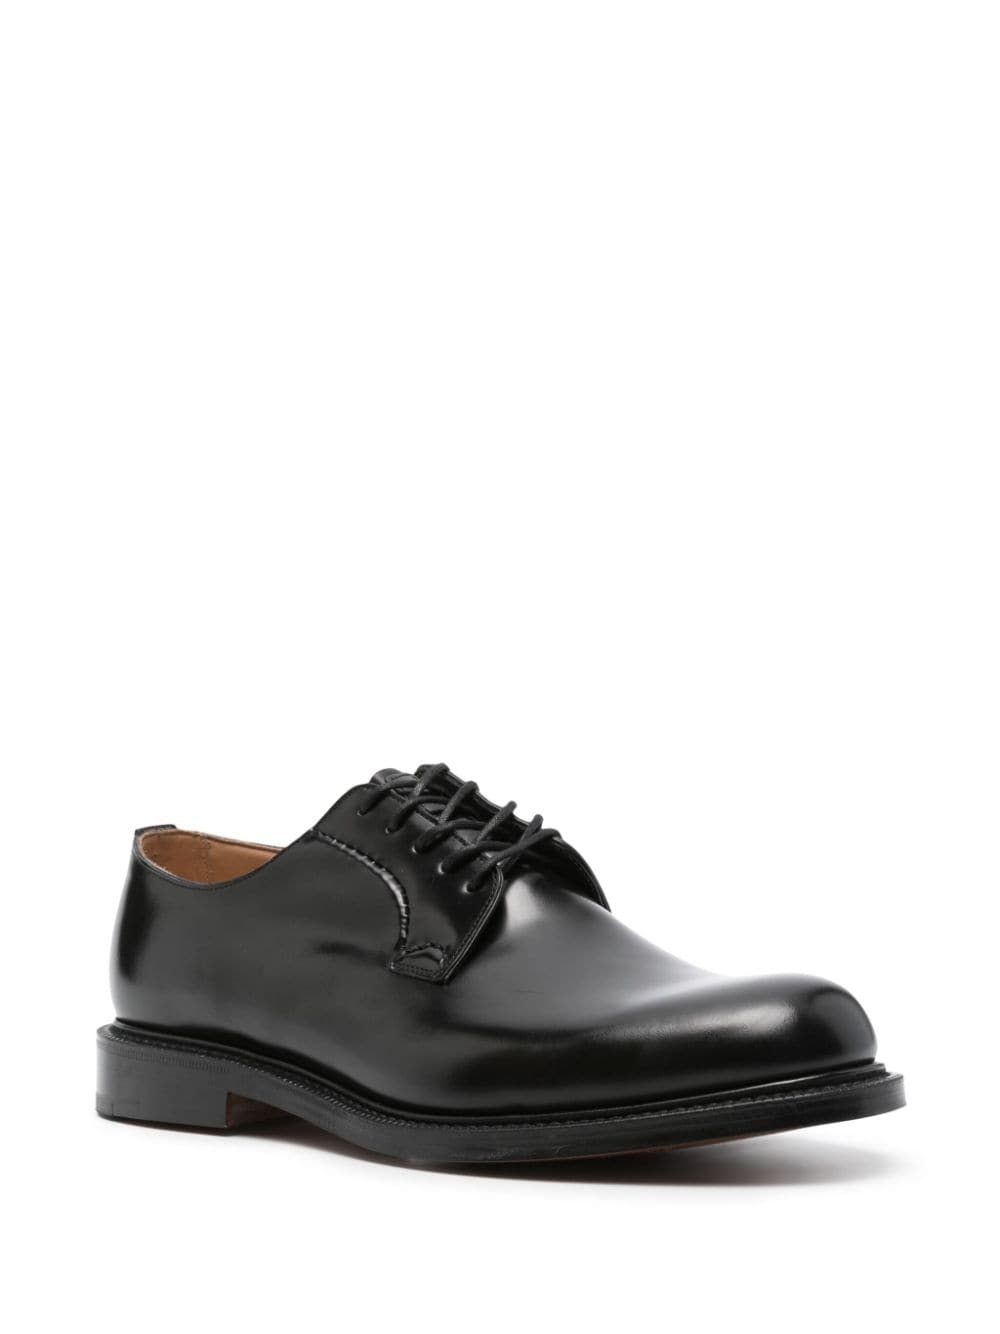 Shannon derby shoes - 2